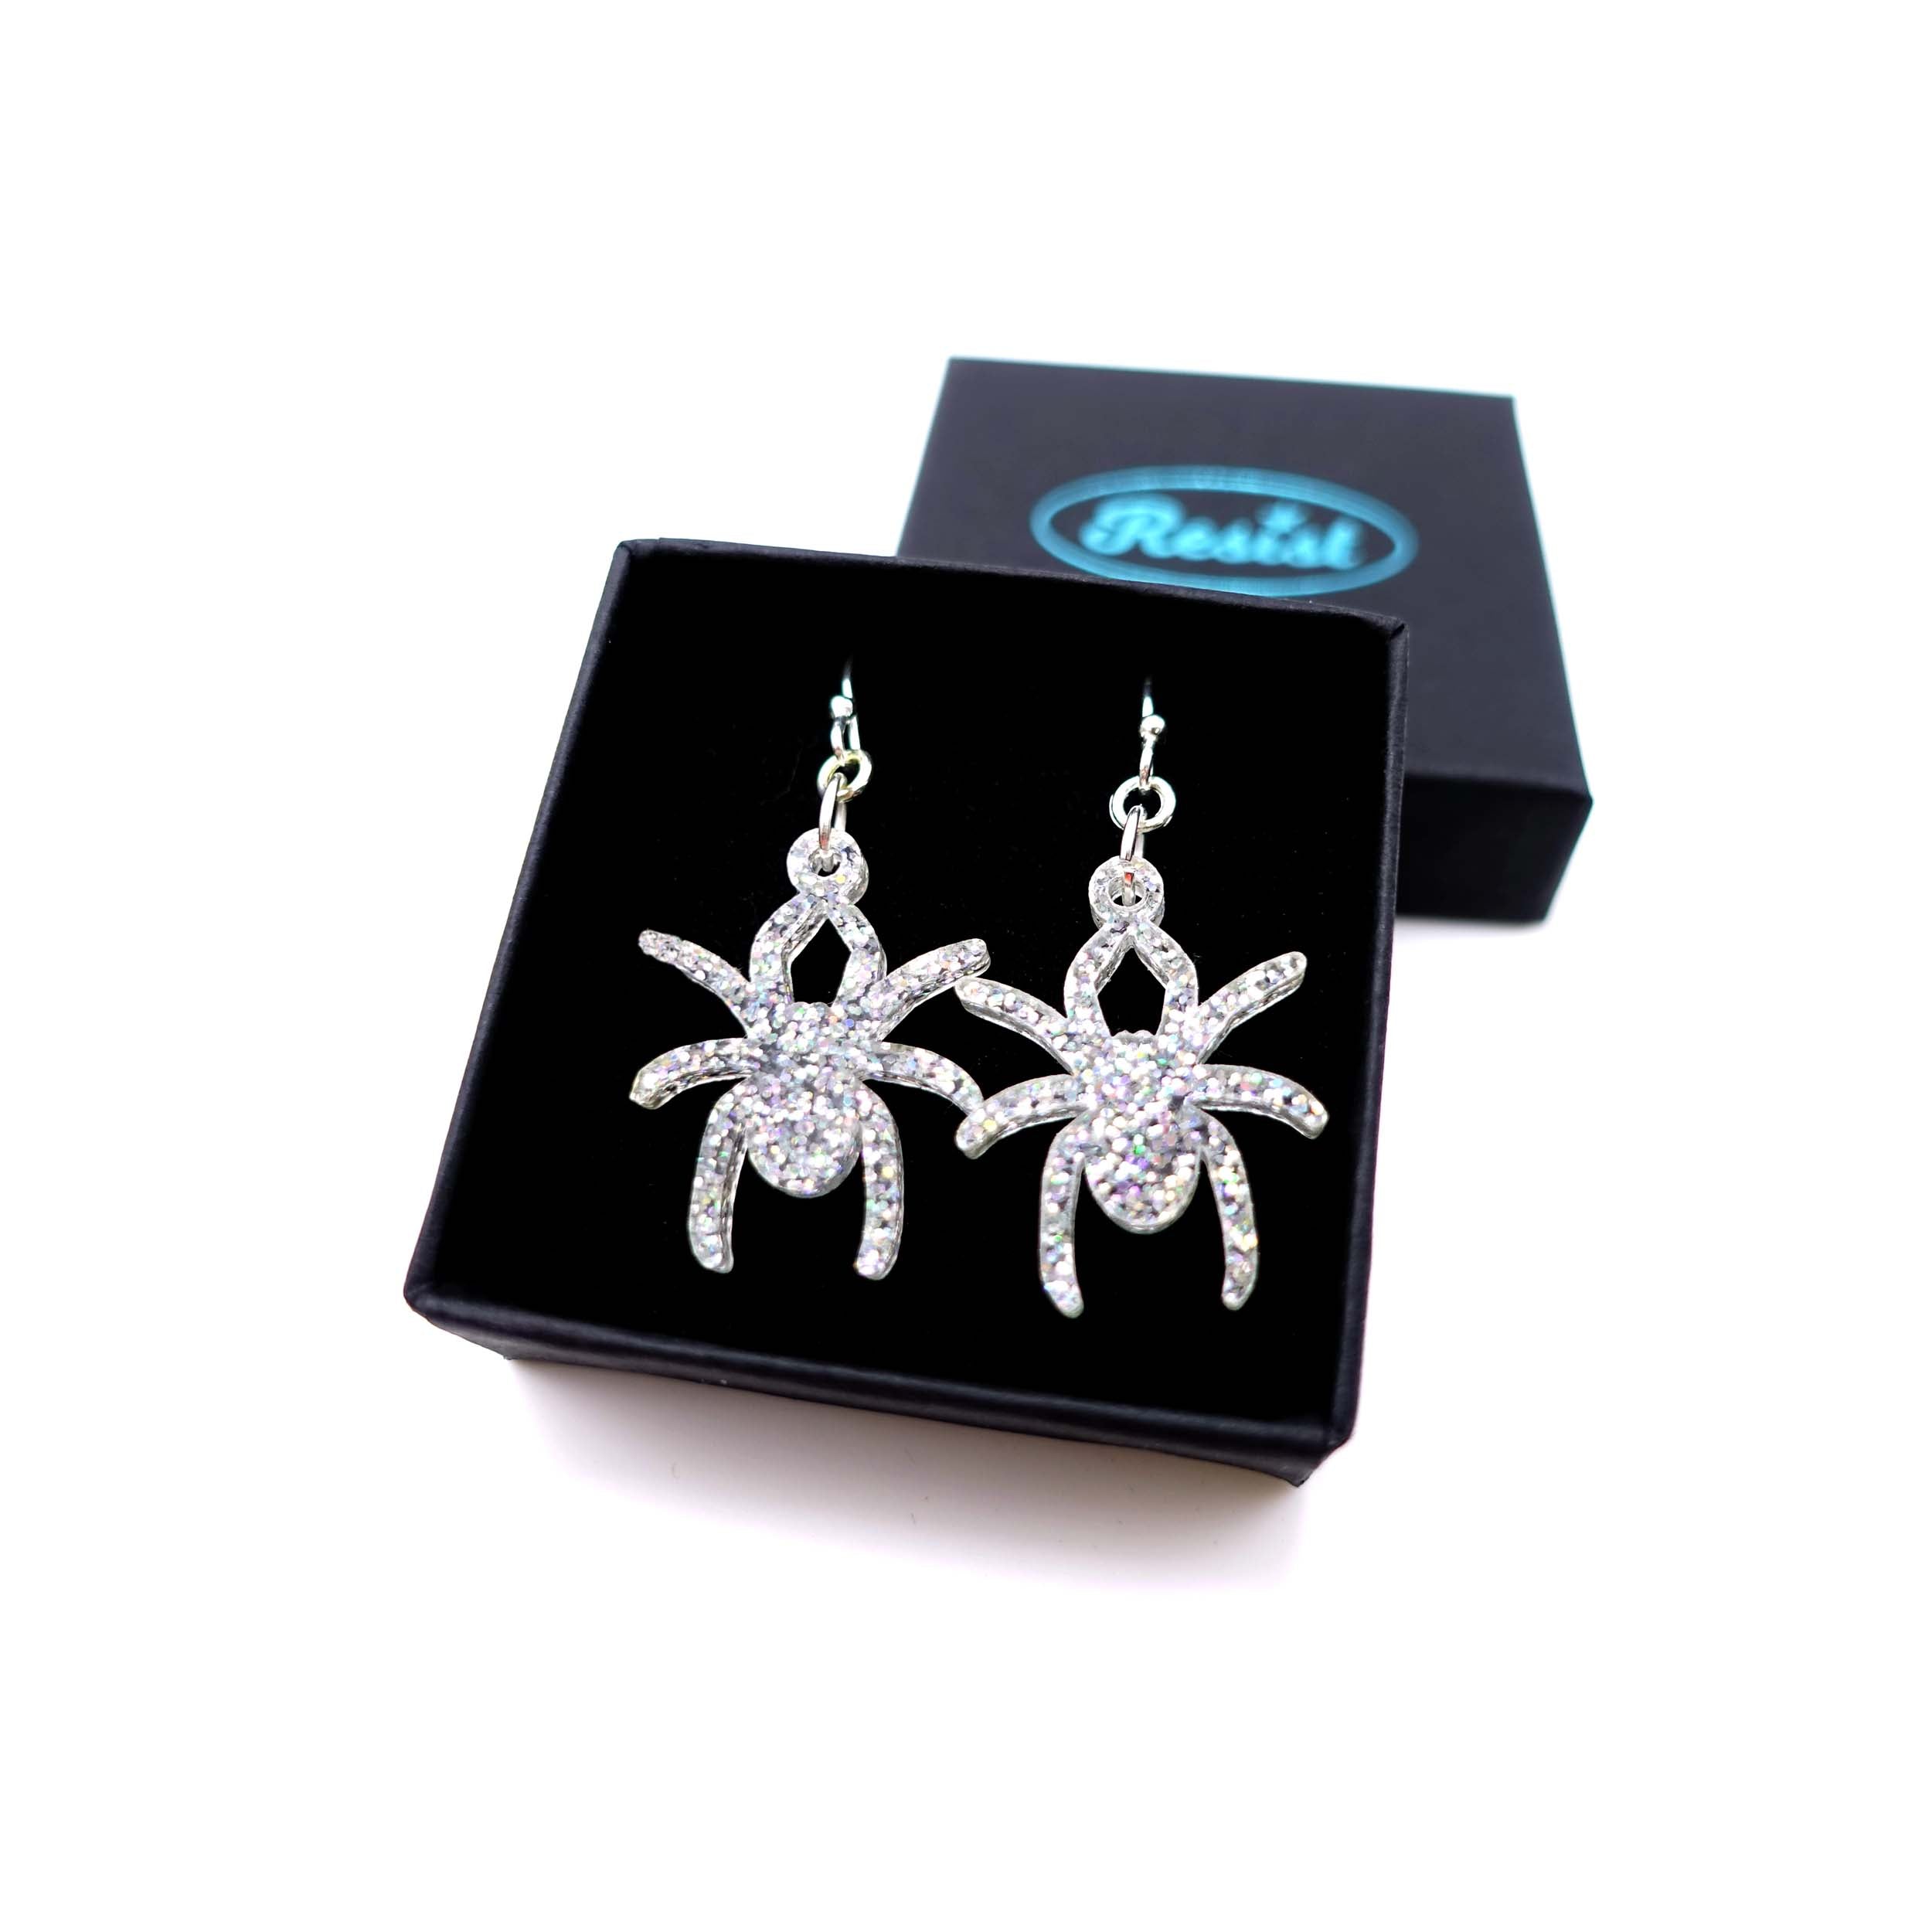 Lady Hale commemorative spider earrings in iridescent silver glitter shown in box.